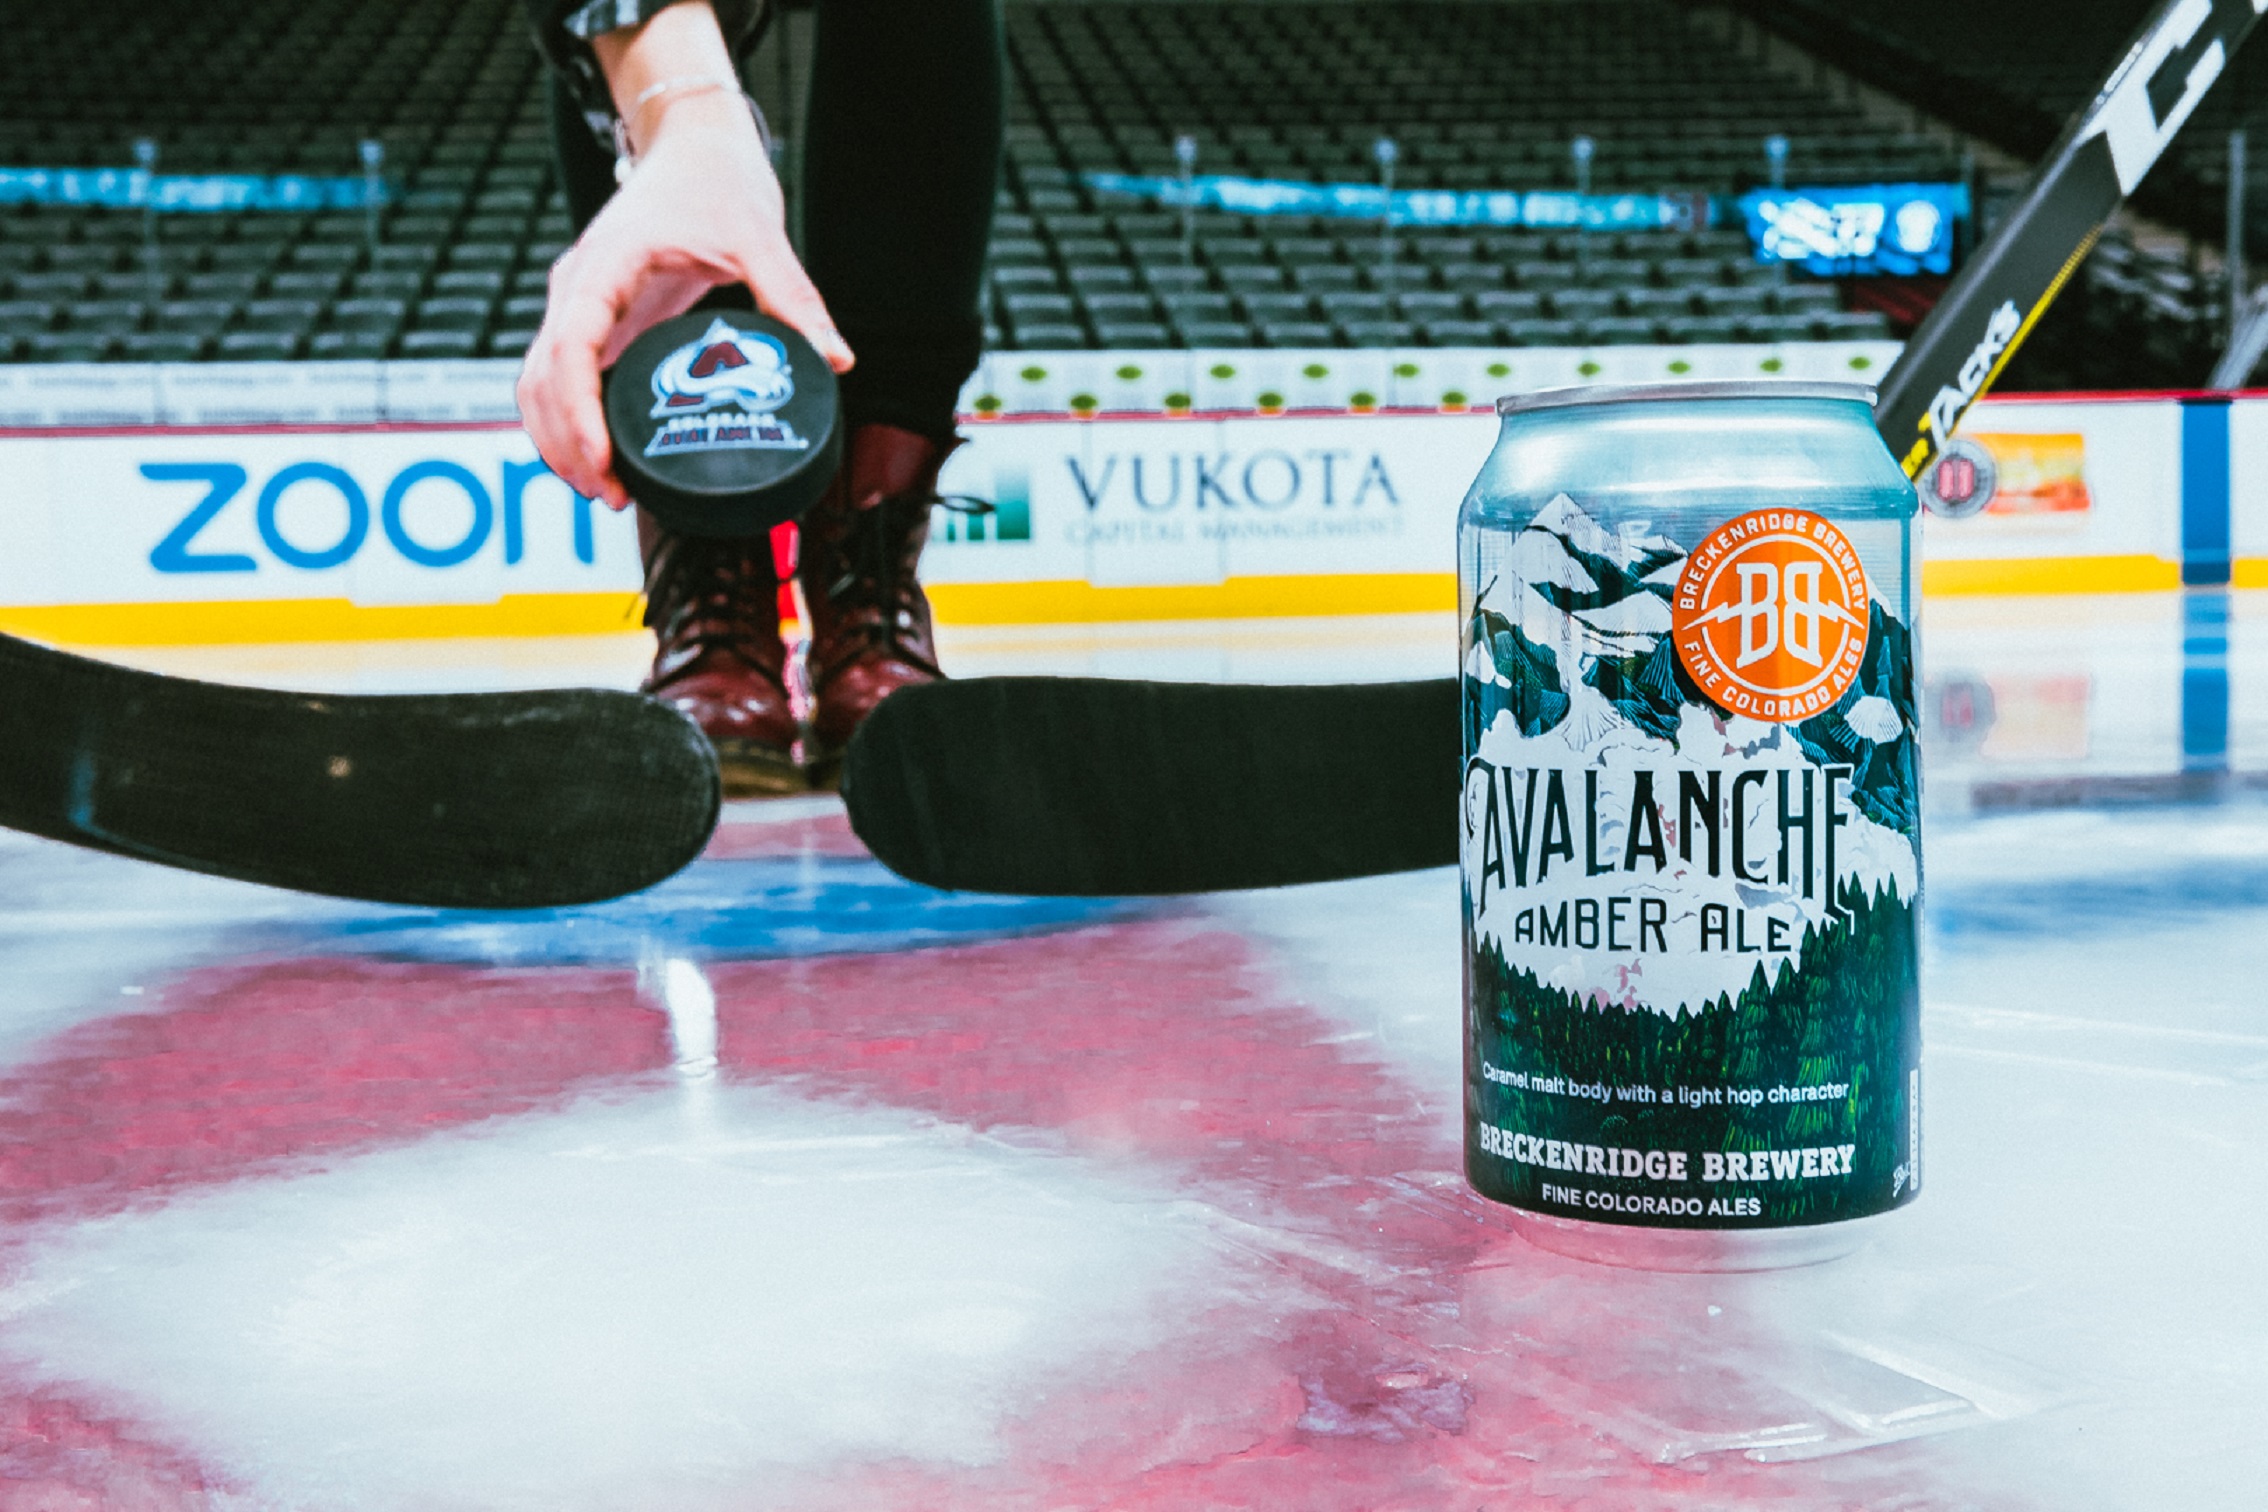 BRECKENRIDGE BREWERY SHARES MORE THAN JUST AVALANCHE ALE WITH HOCKEY FANS THIS PLAYOFF SEASON